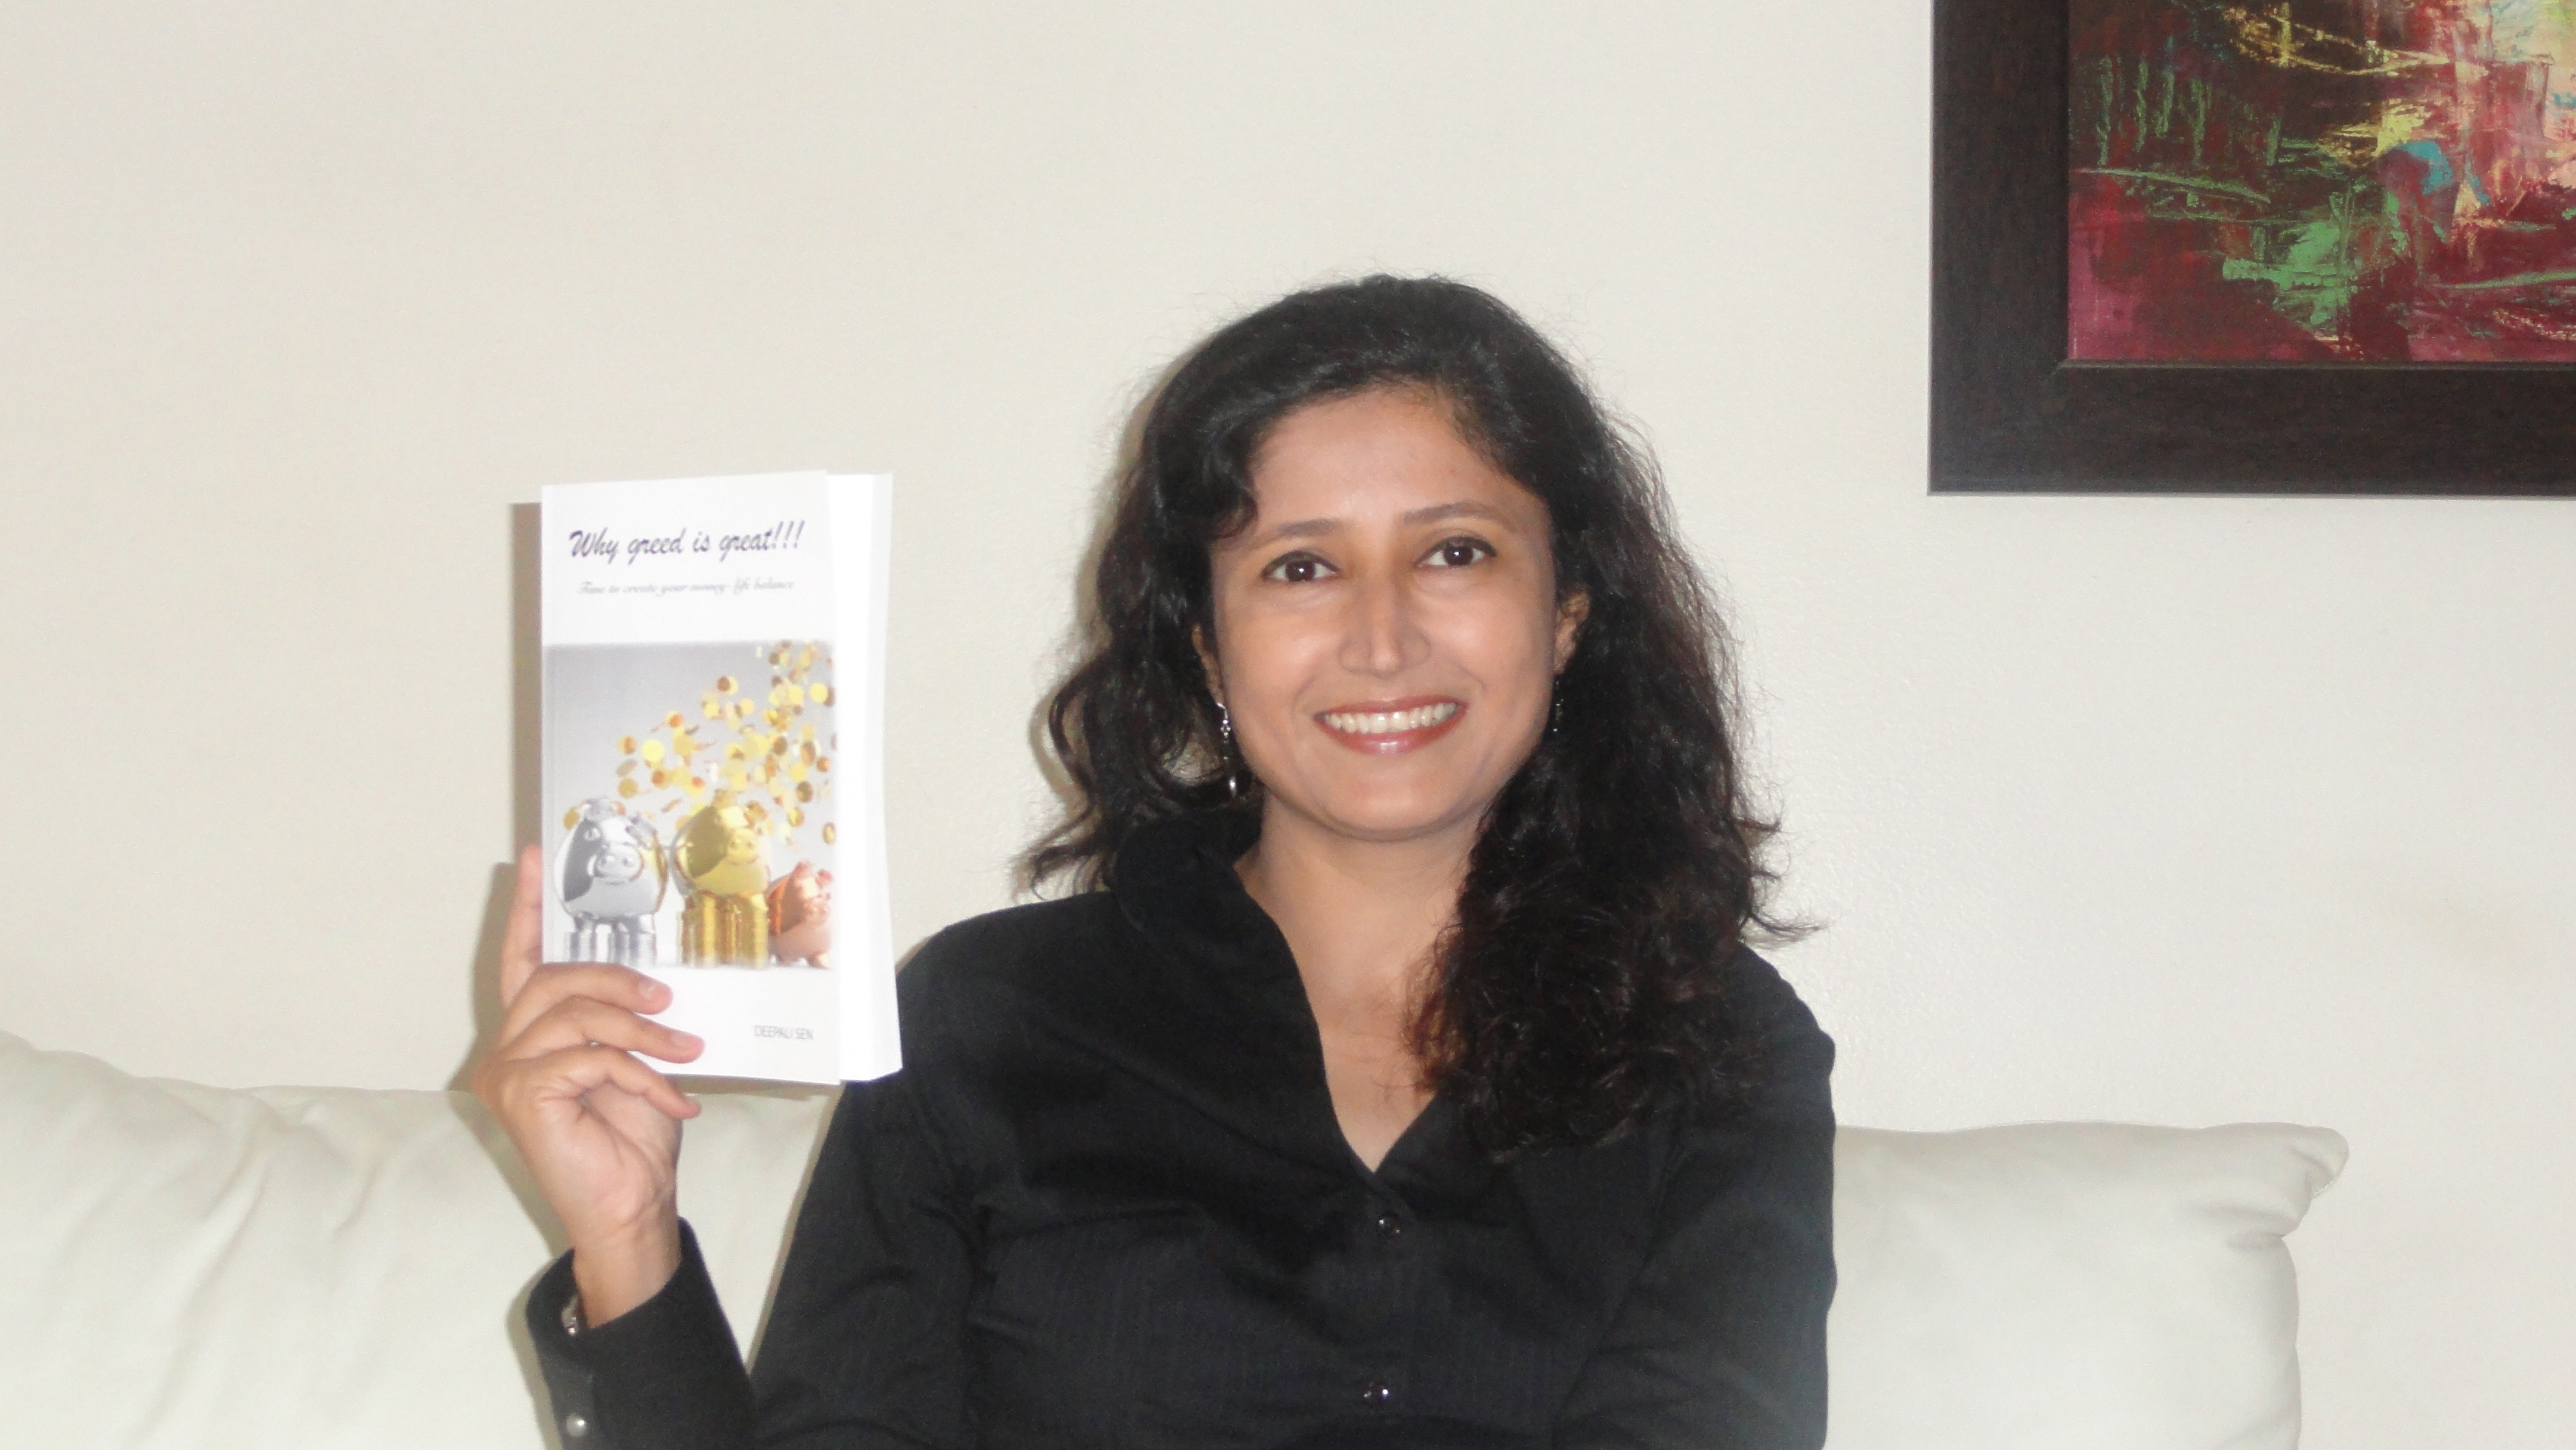 Deepali with her book